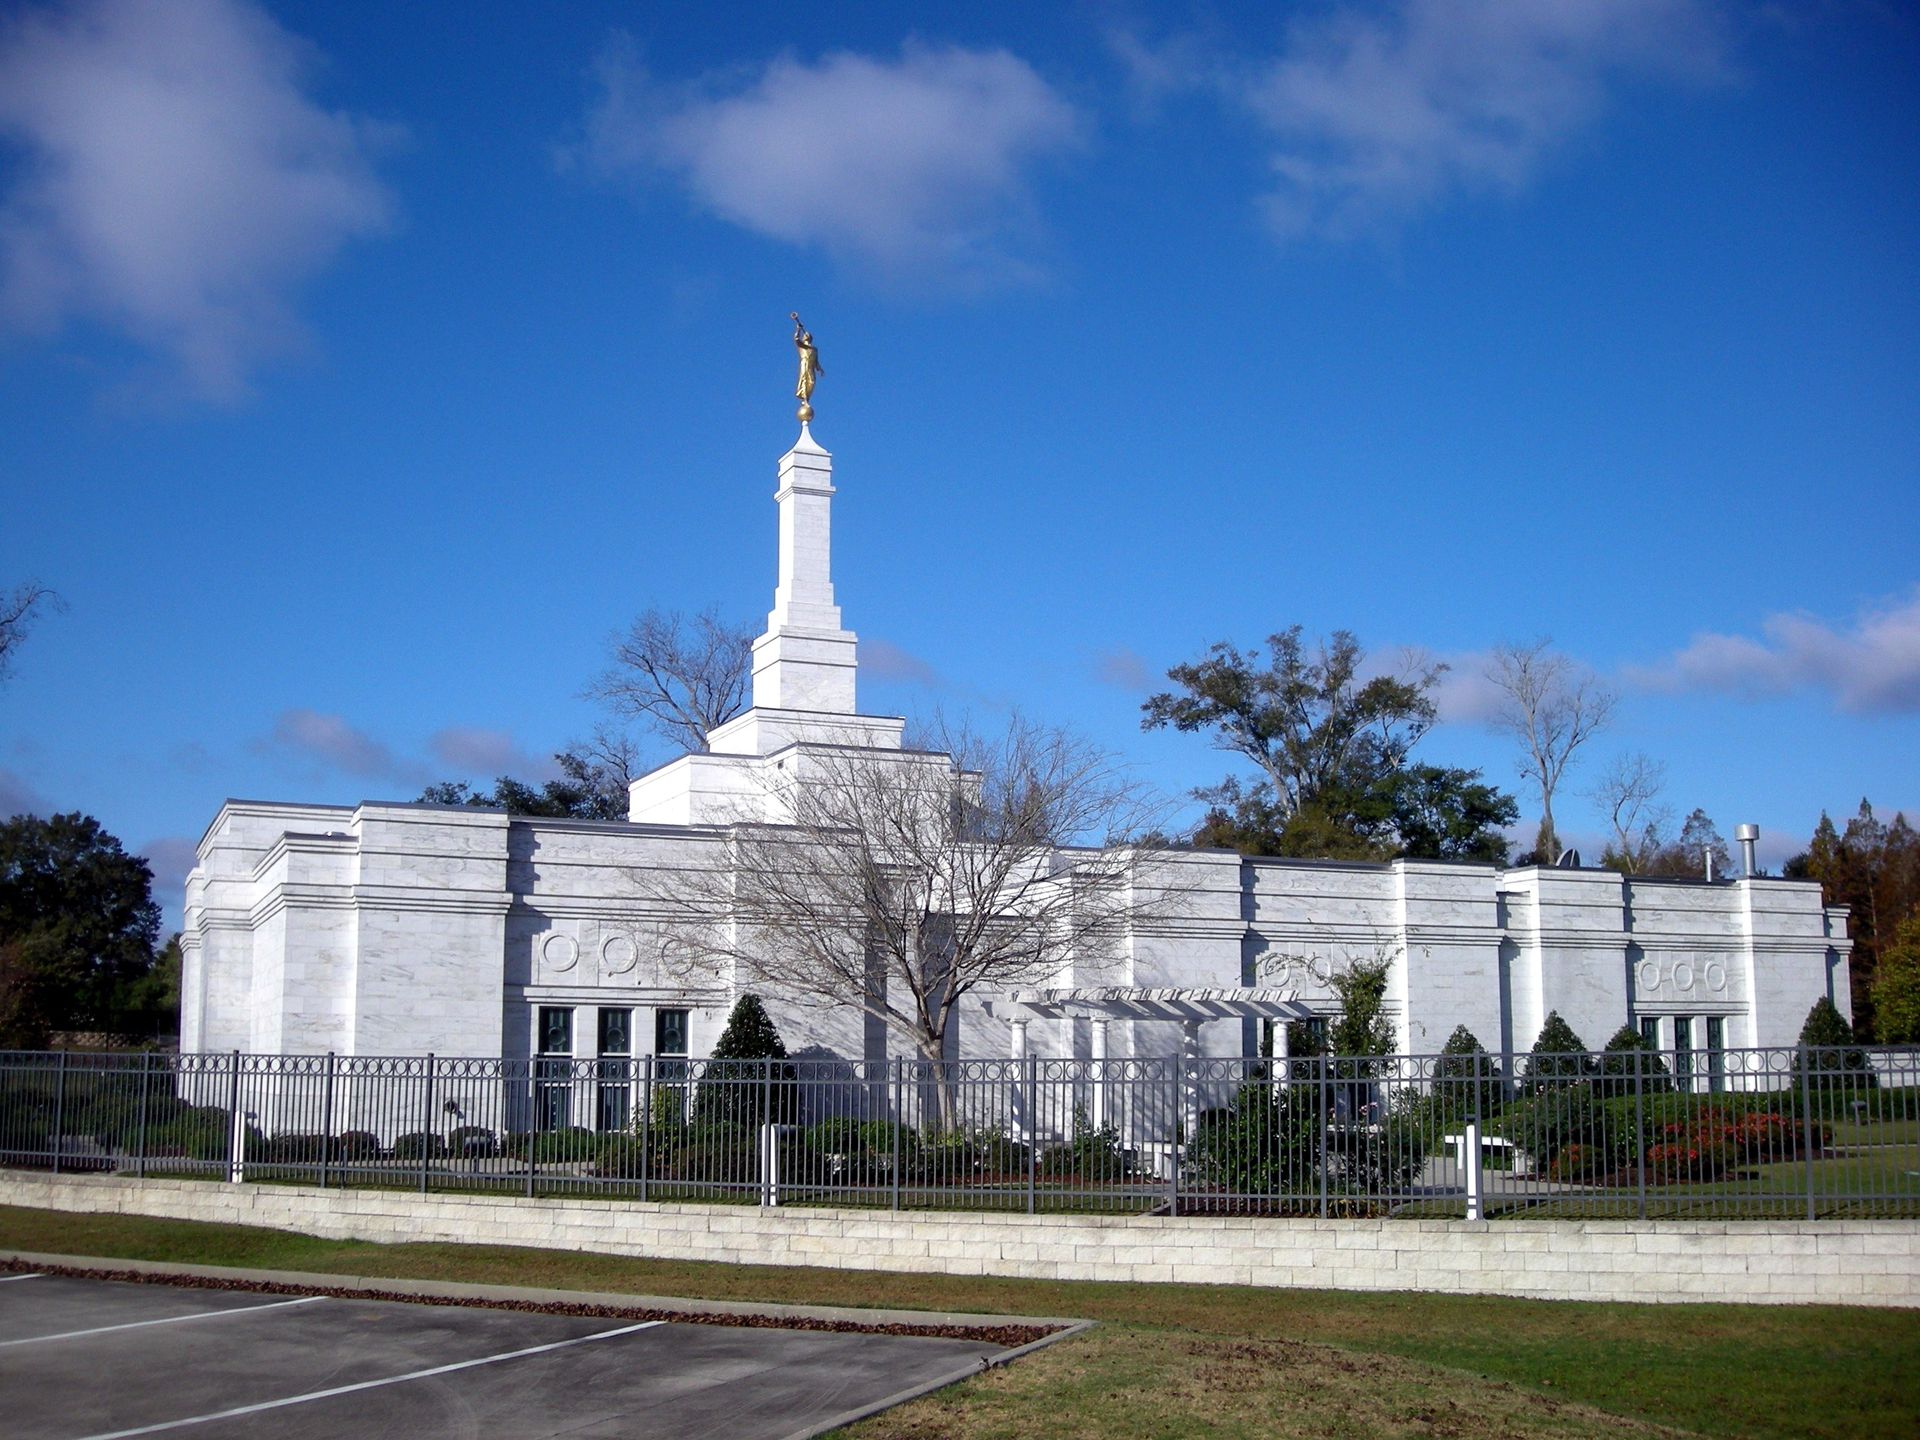 A side view of the Baton Rouge Louisiana Temple and grounds.